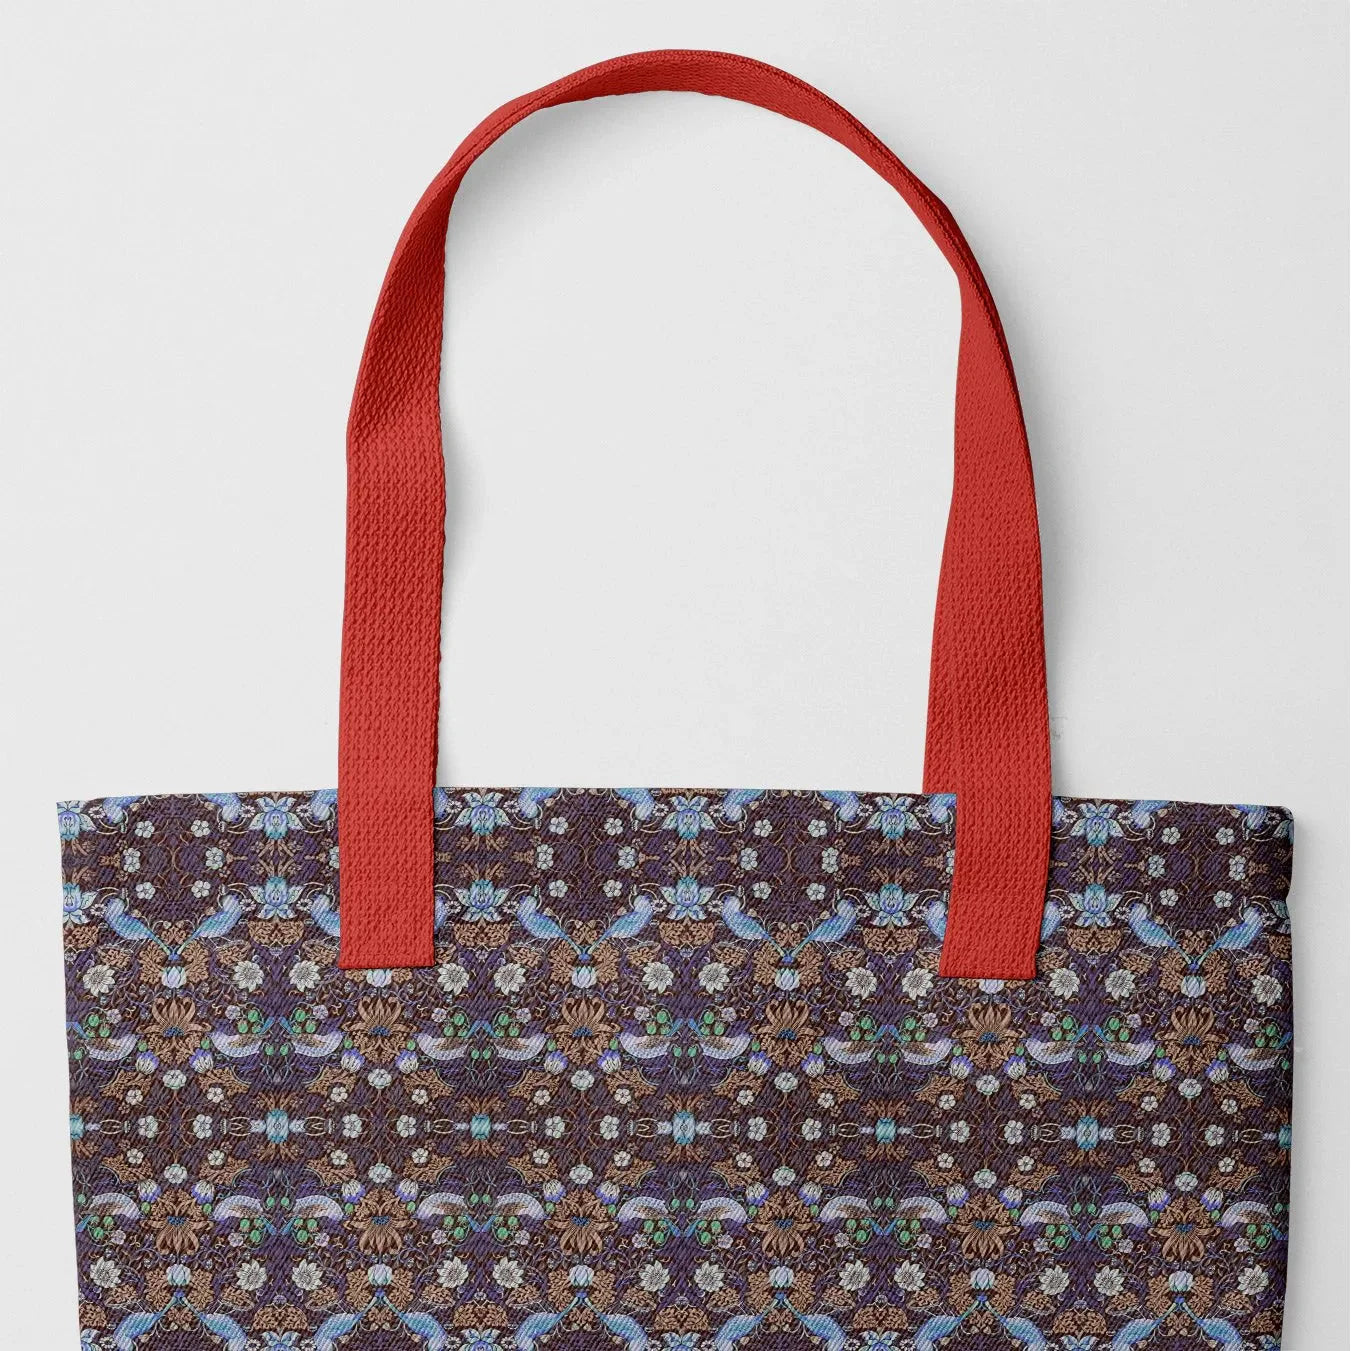 Strawberry Thief Too x 2 Tote - Heavy Duty Reusable Grocery Bag - Red Handles - Shopping Totes - Aesthetic Art